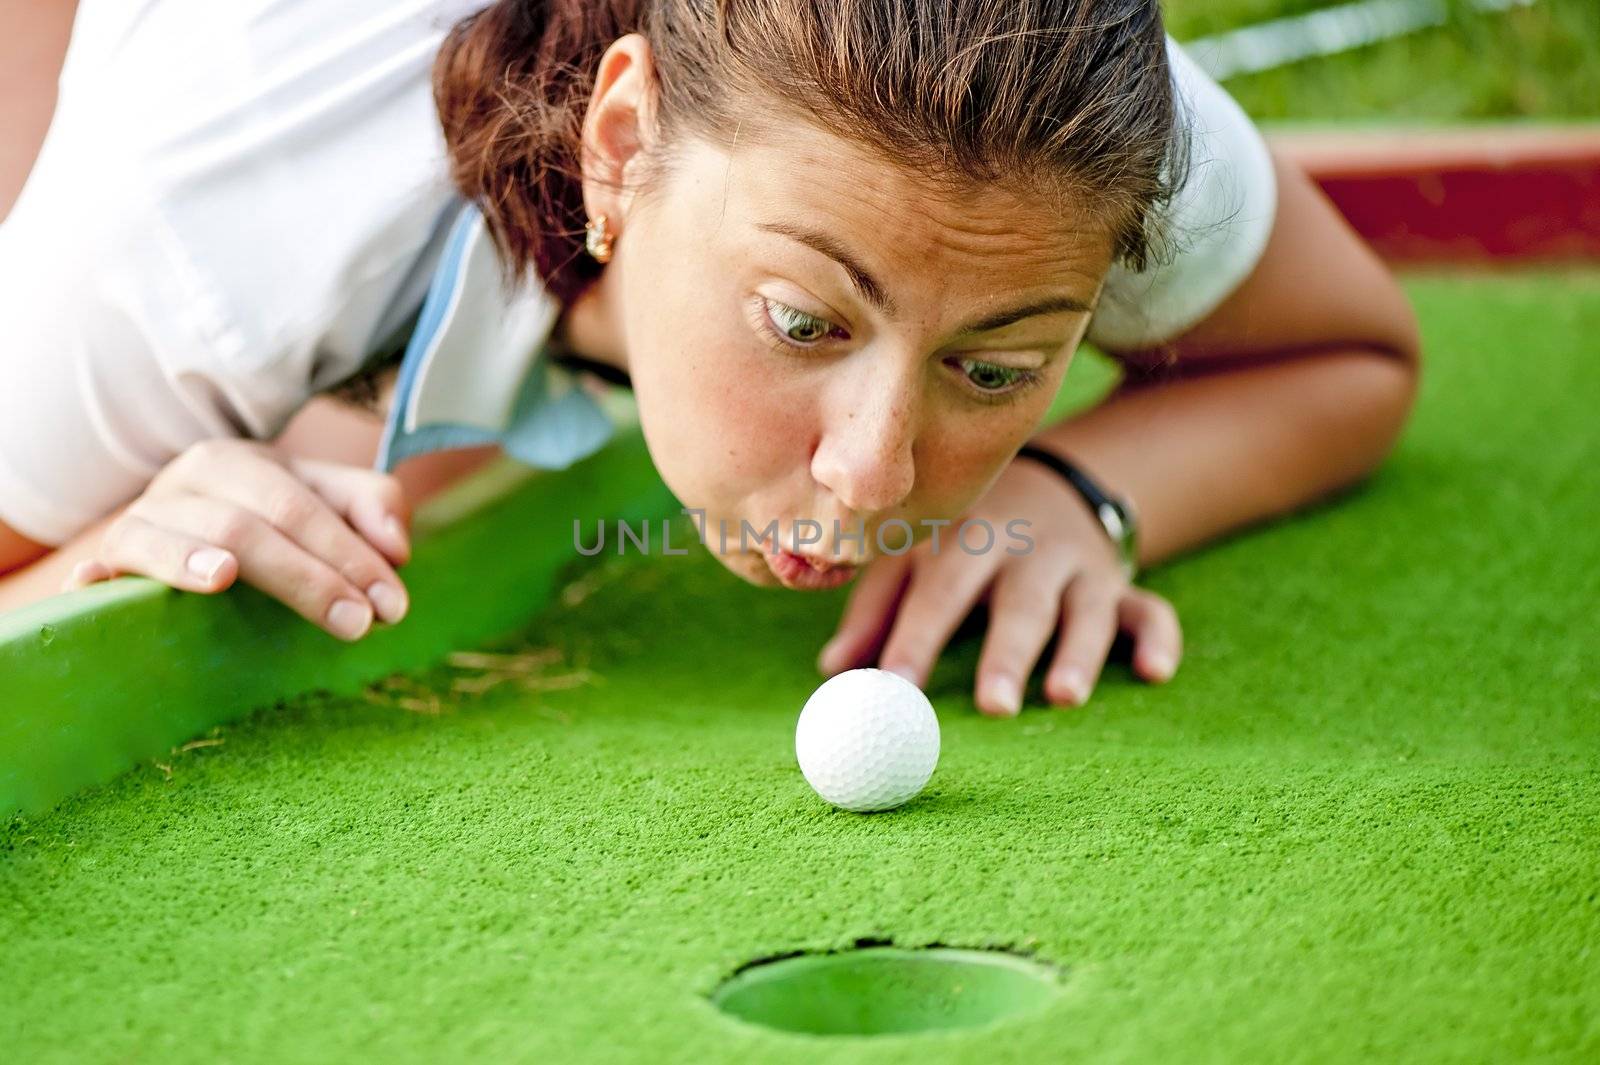 Girl cheating in the game of golf by kosmsos111